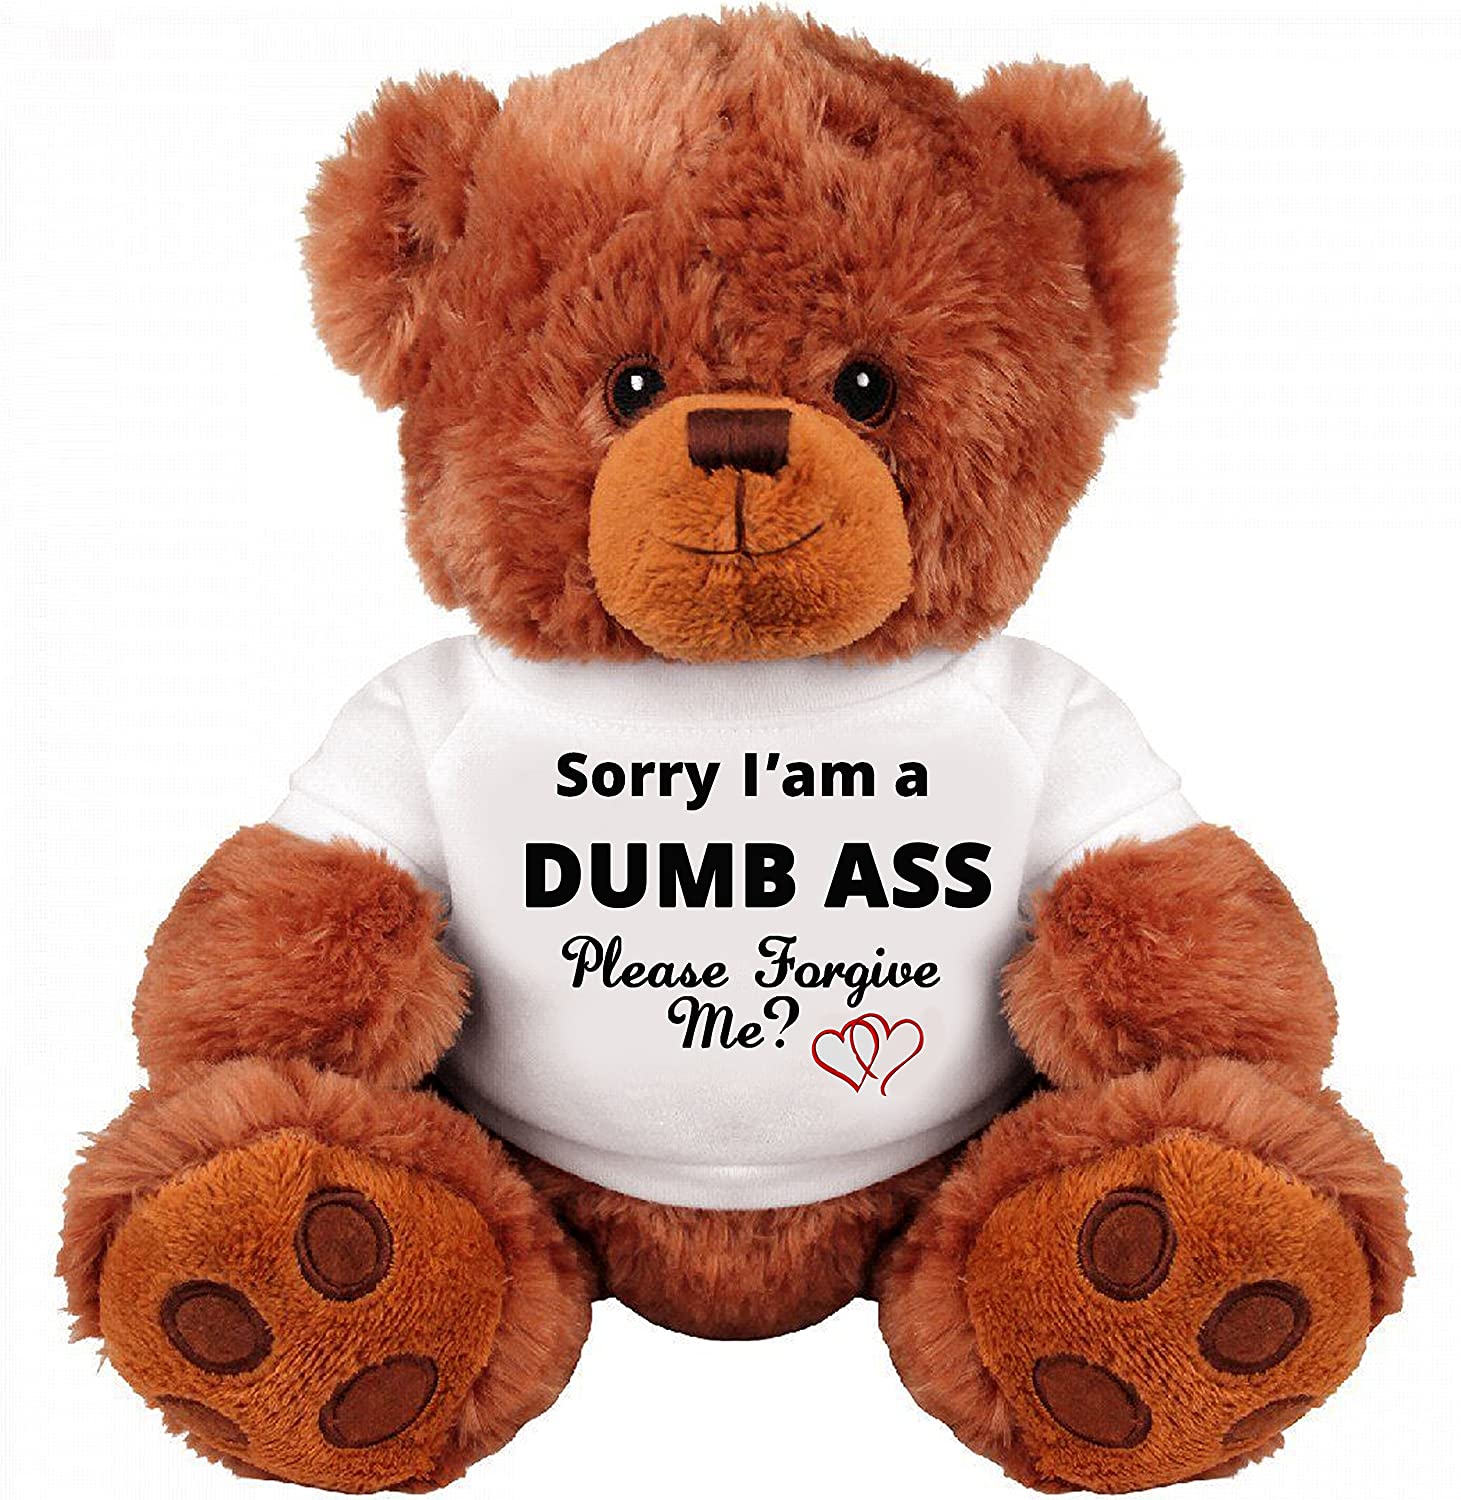 Teddy Bear With Sorry Saying 